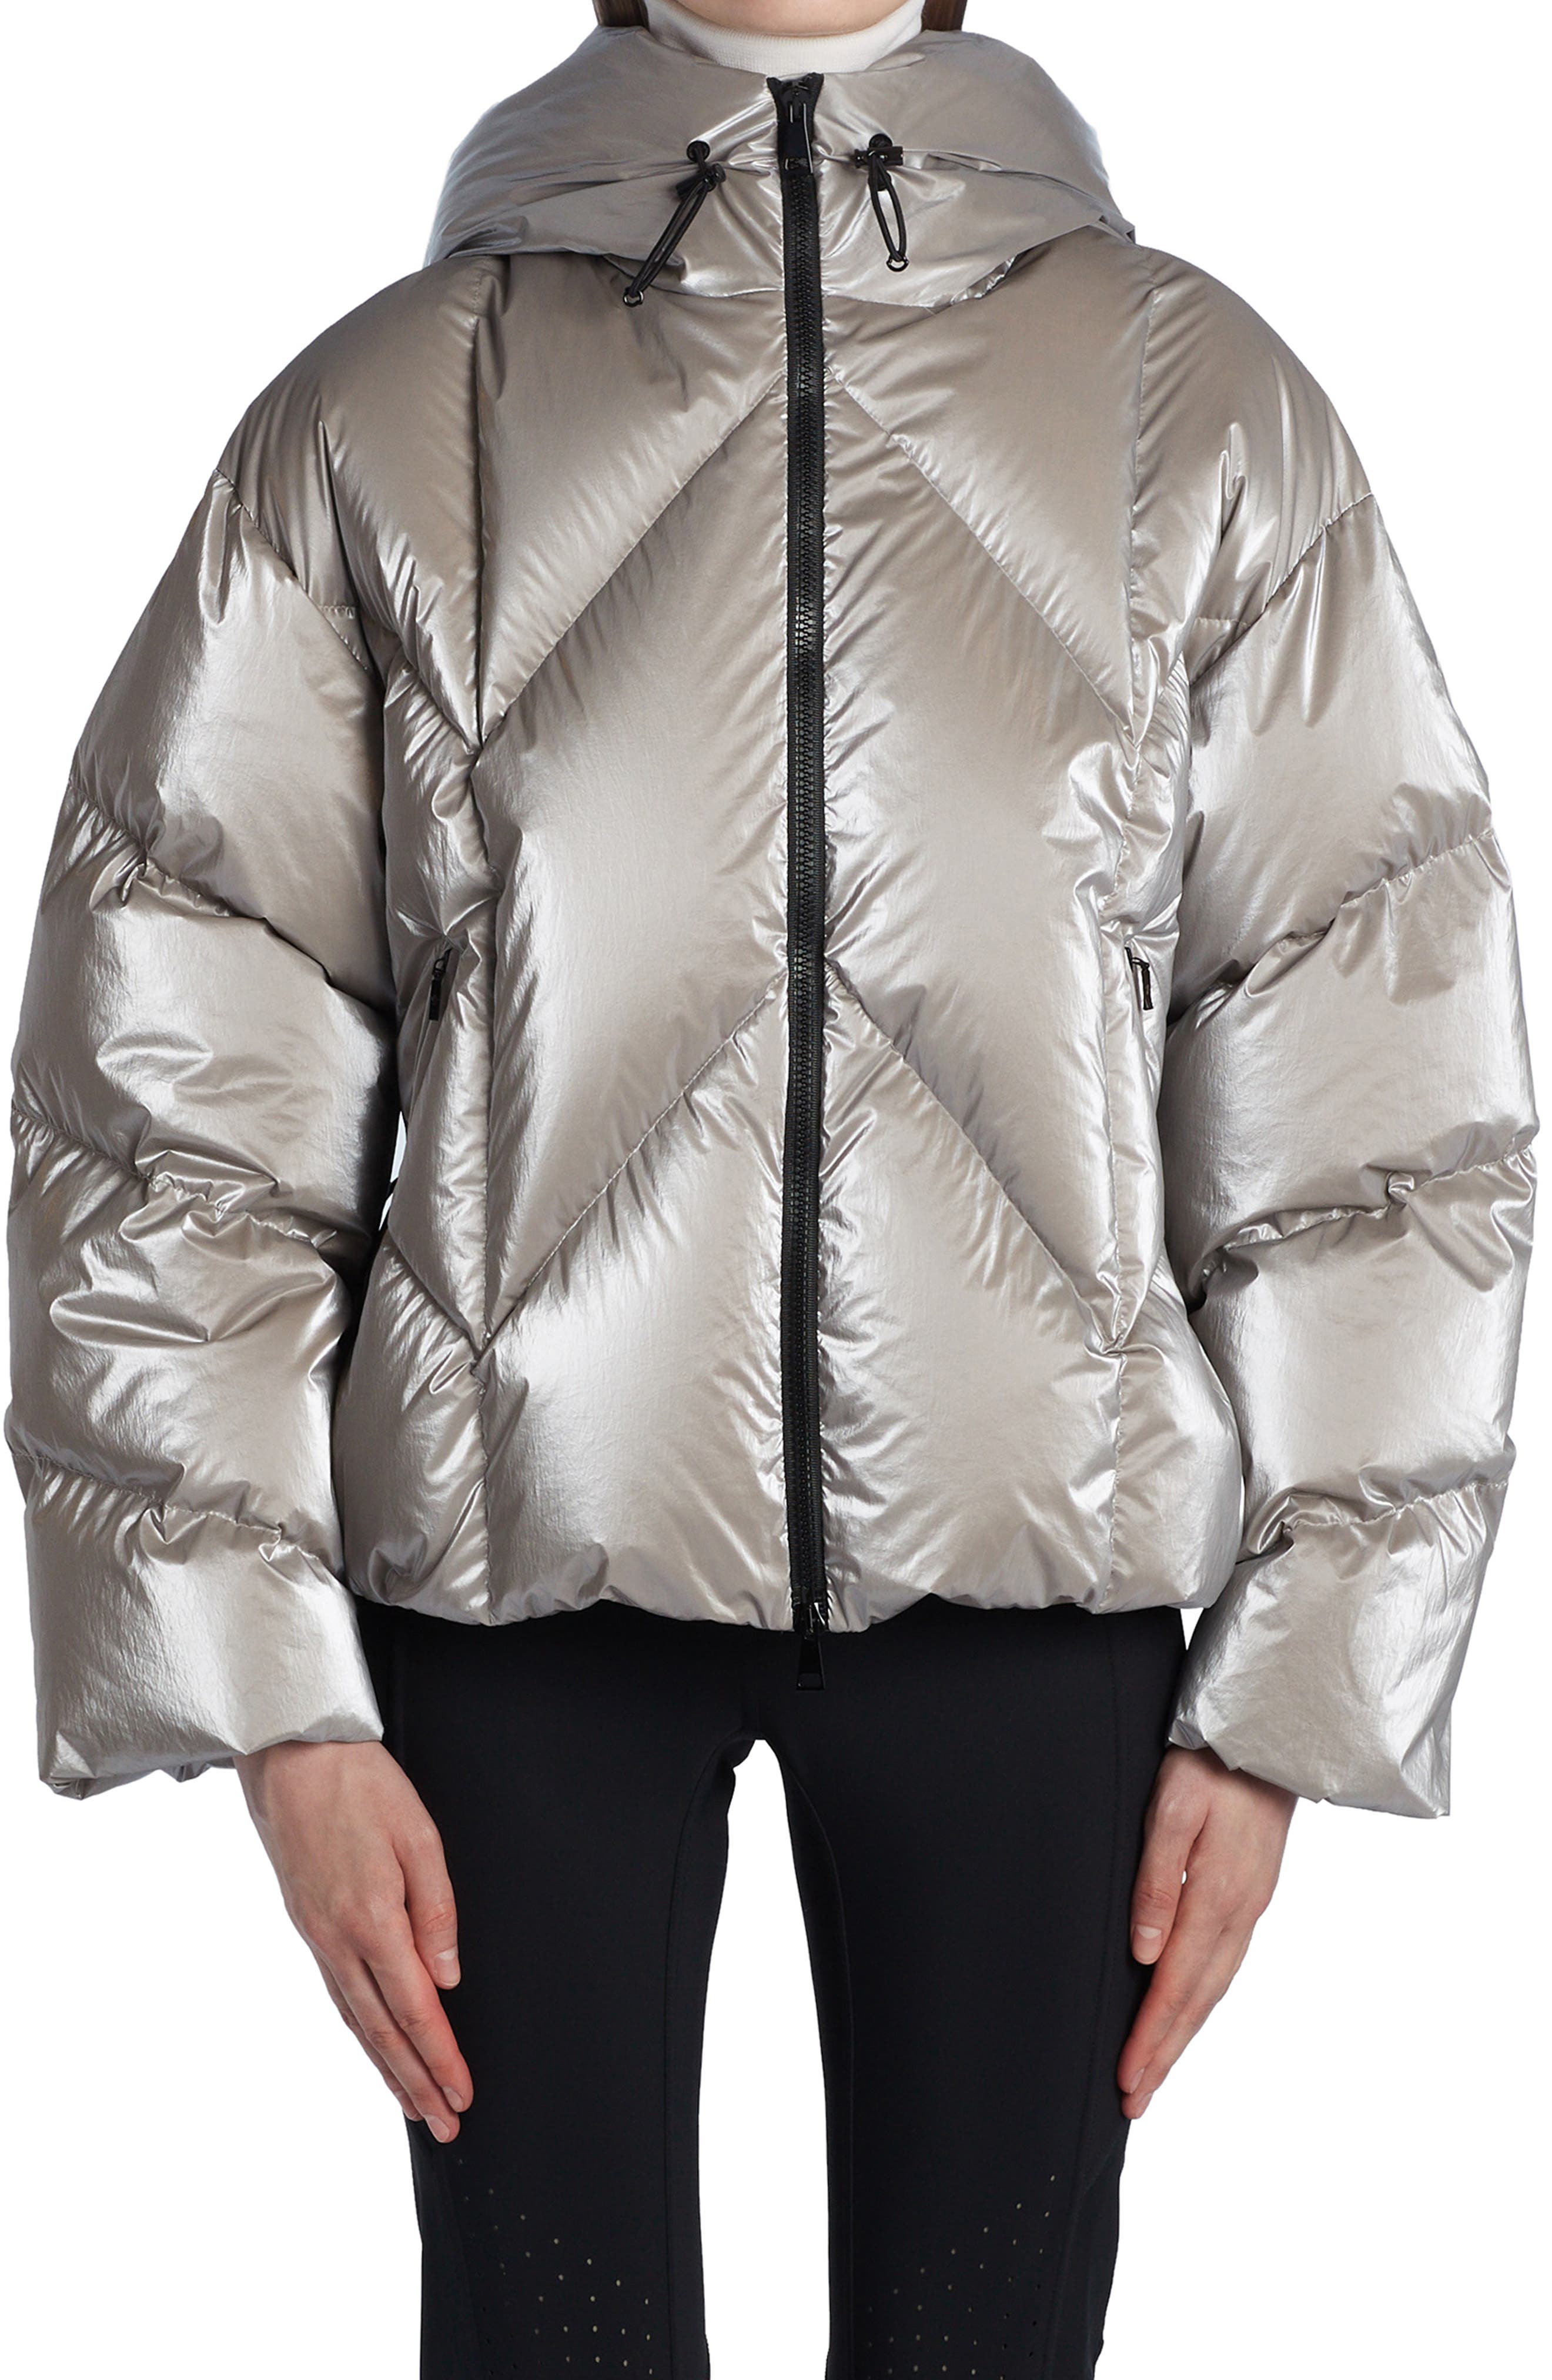 Moncler Frele 750 Fill Power Down Hooded Puffer Jacket in Grey at Nordstrom